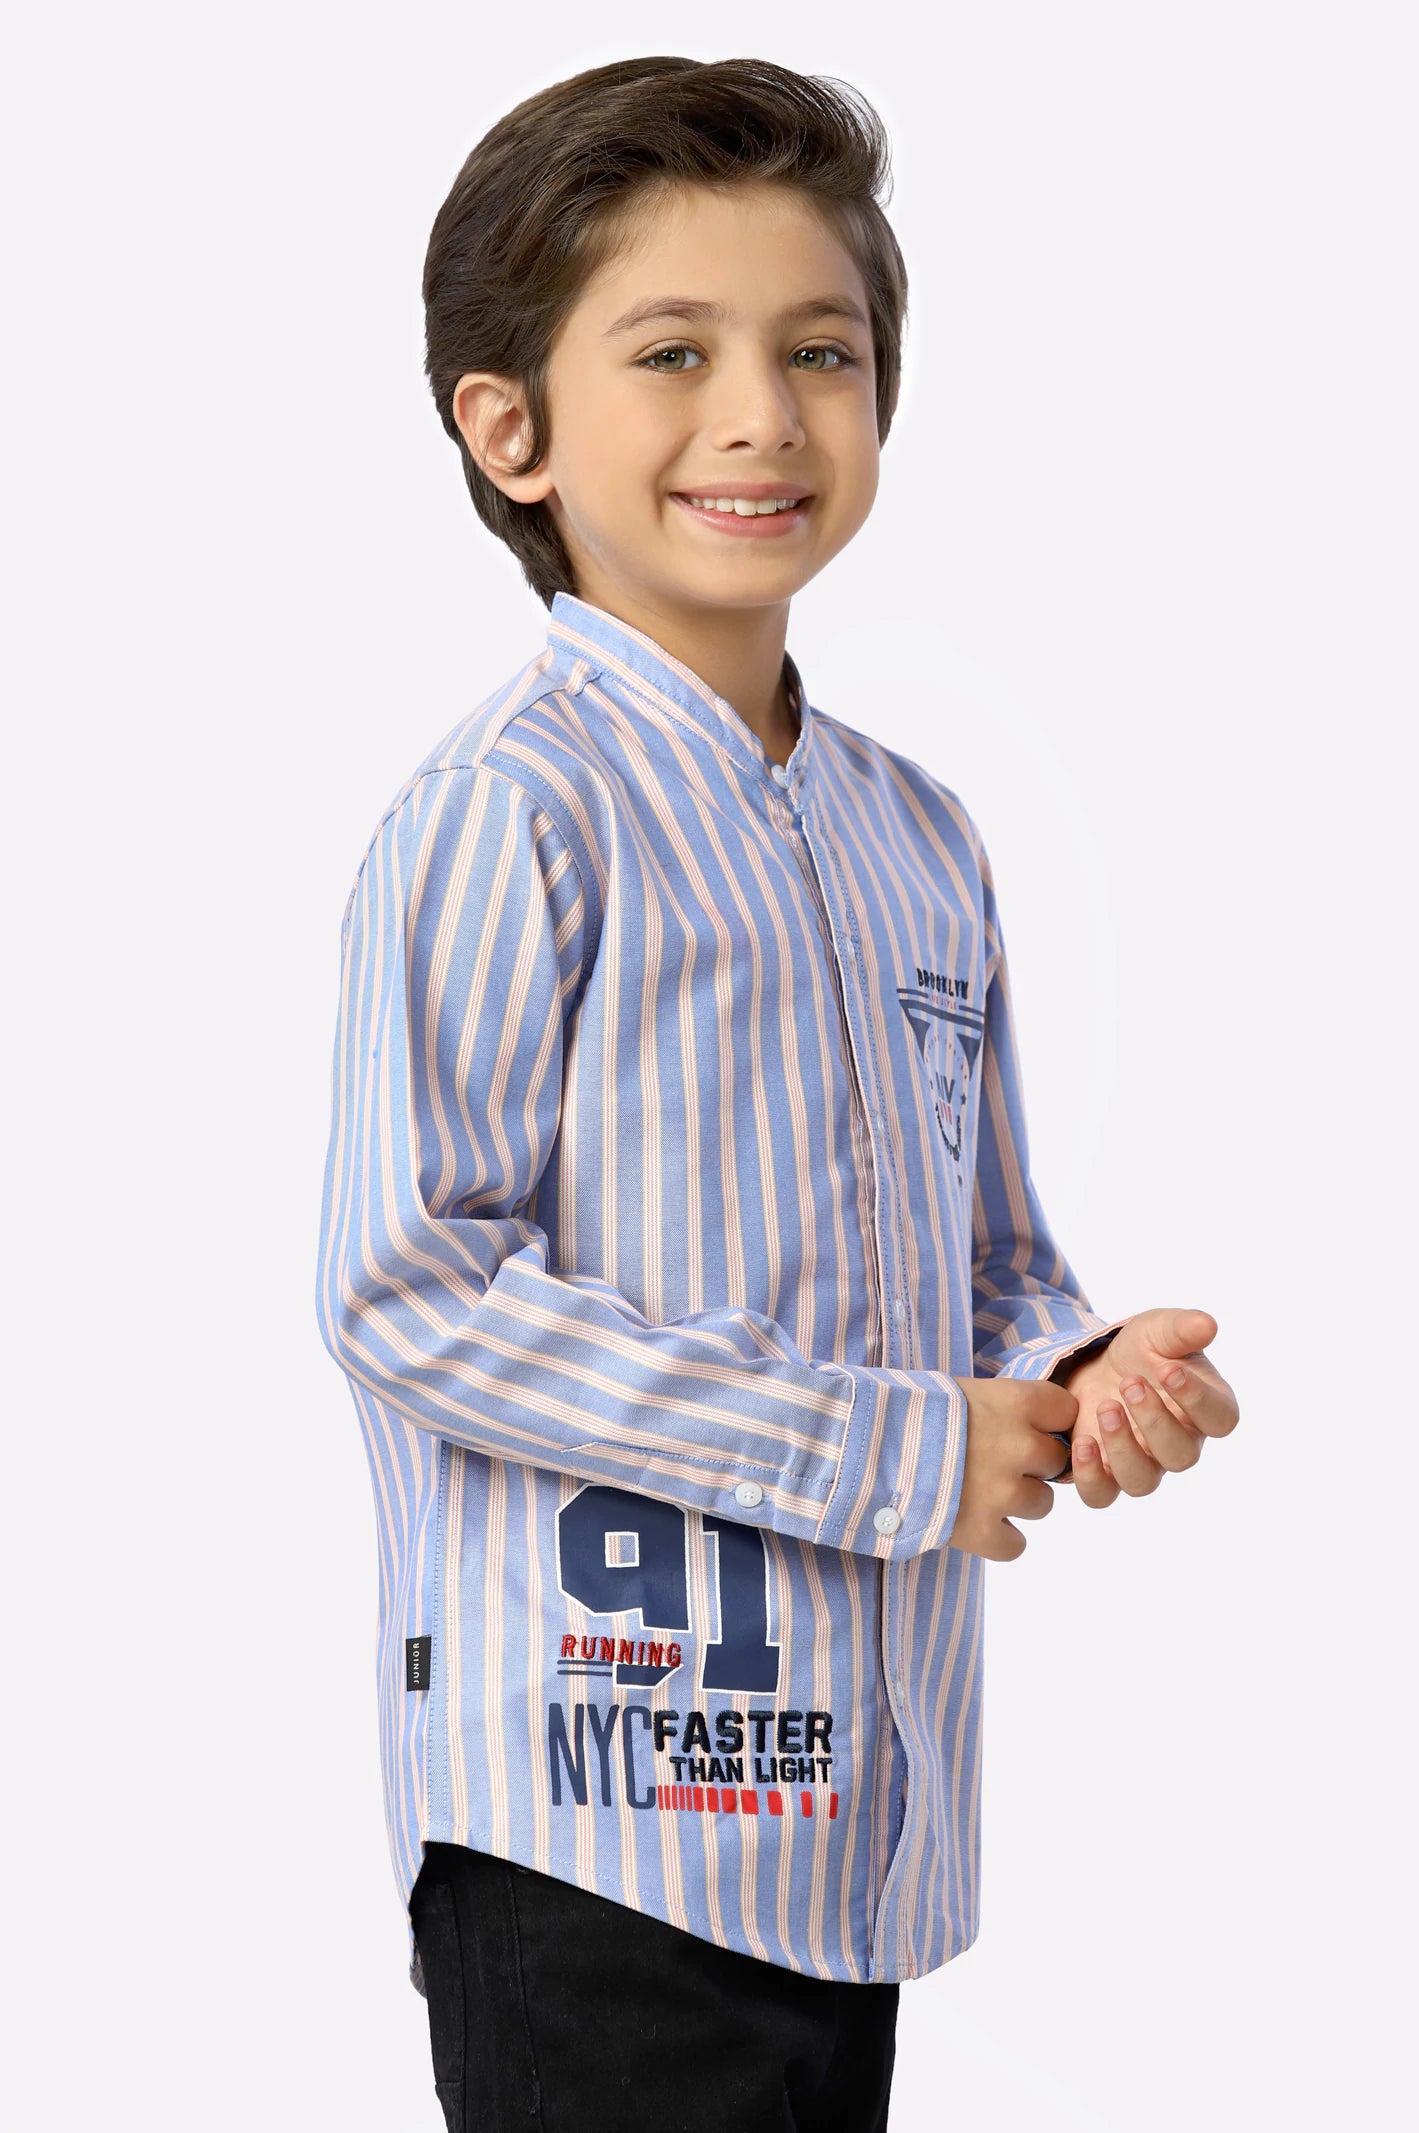 Royal Blue Awning Stripes Boys Shirt From Diners